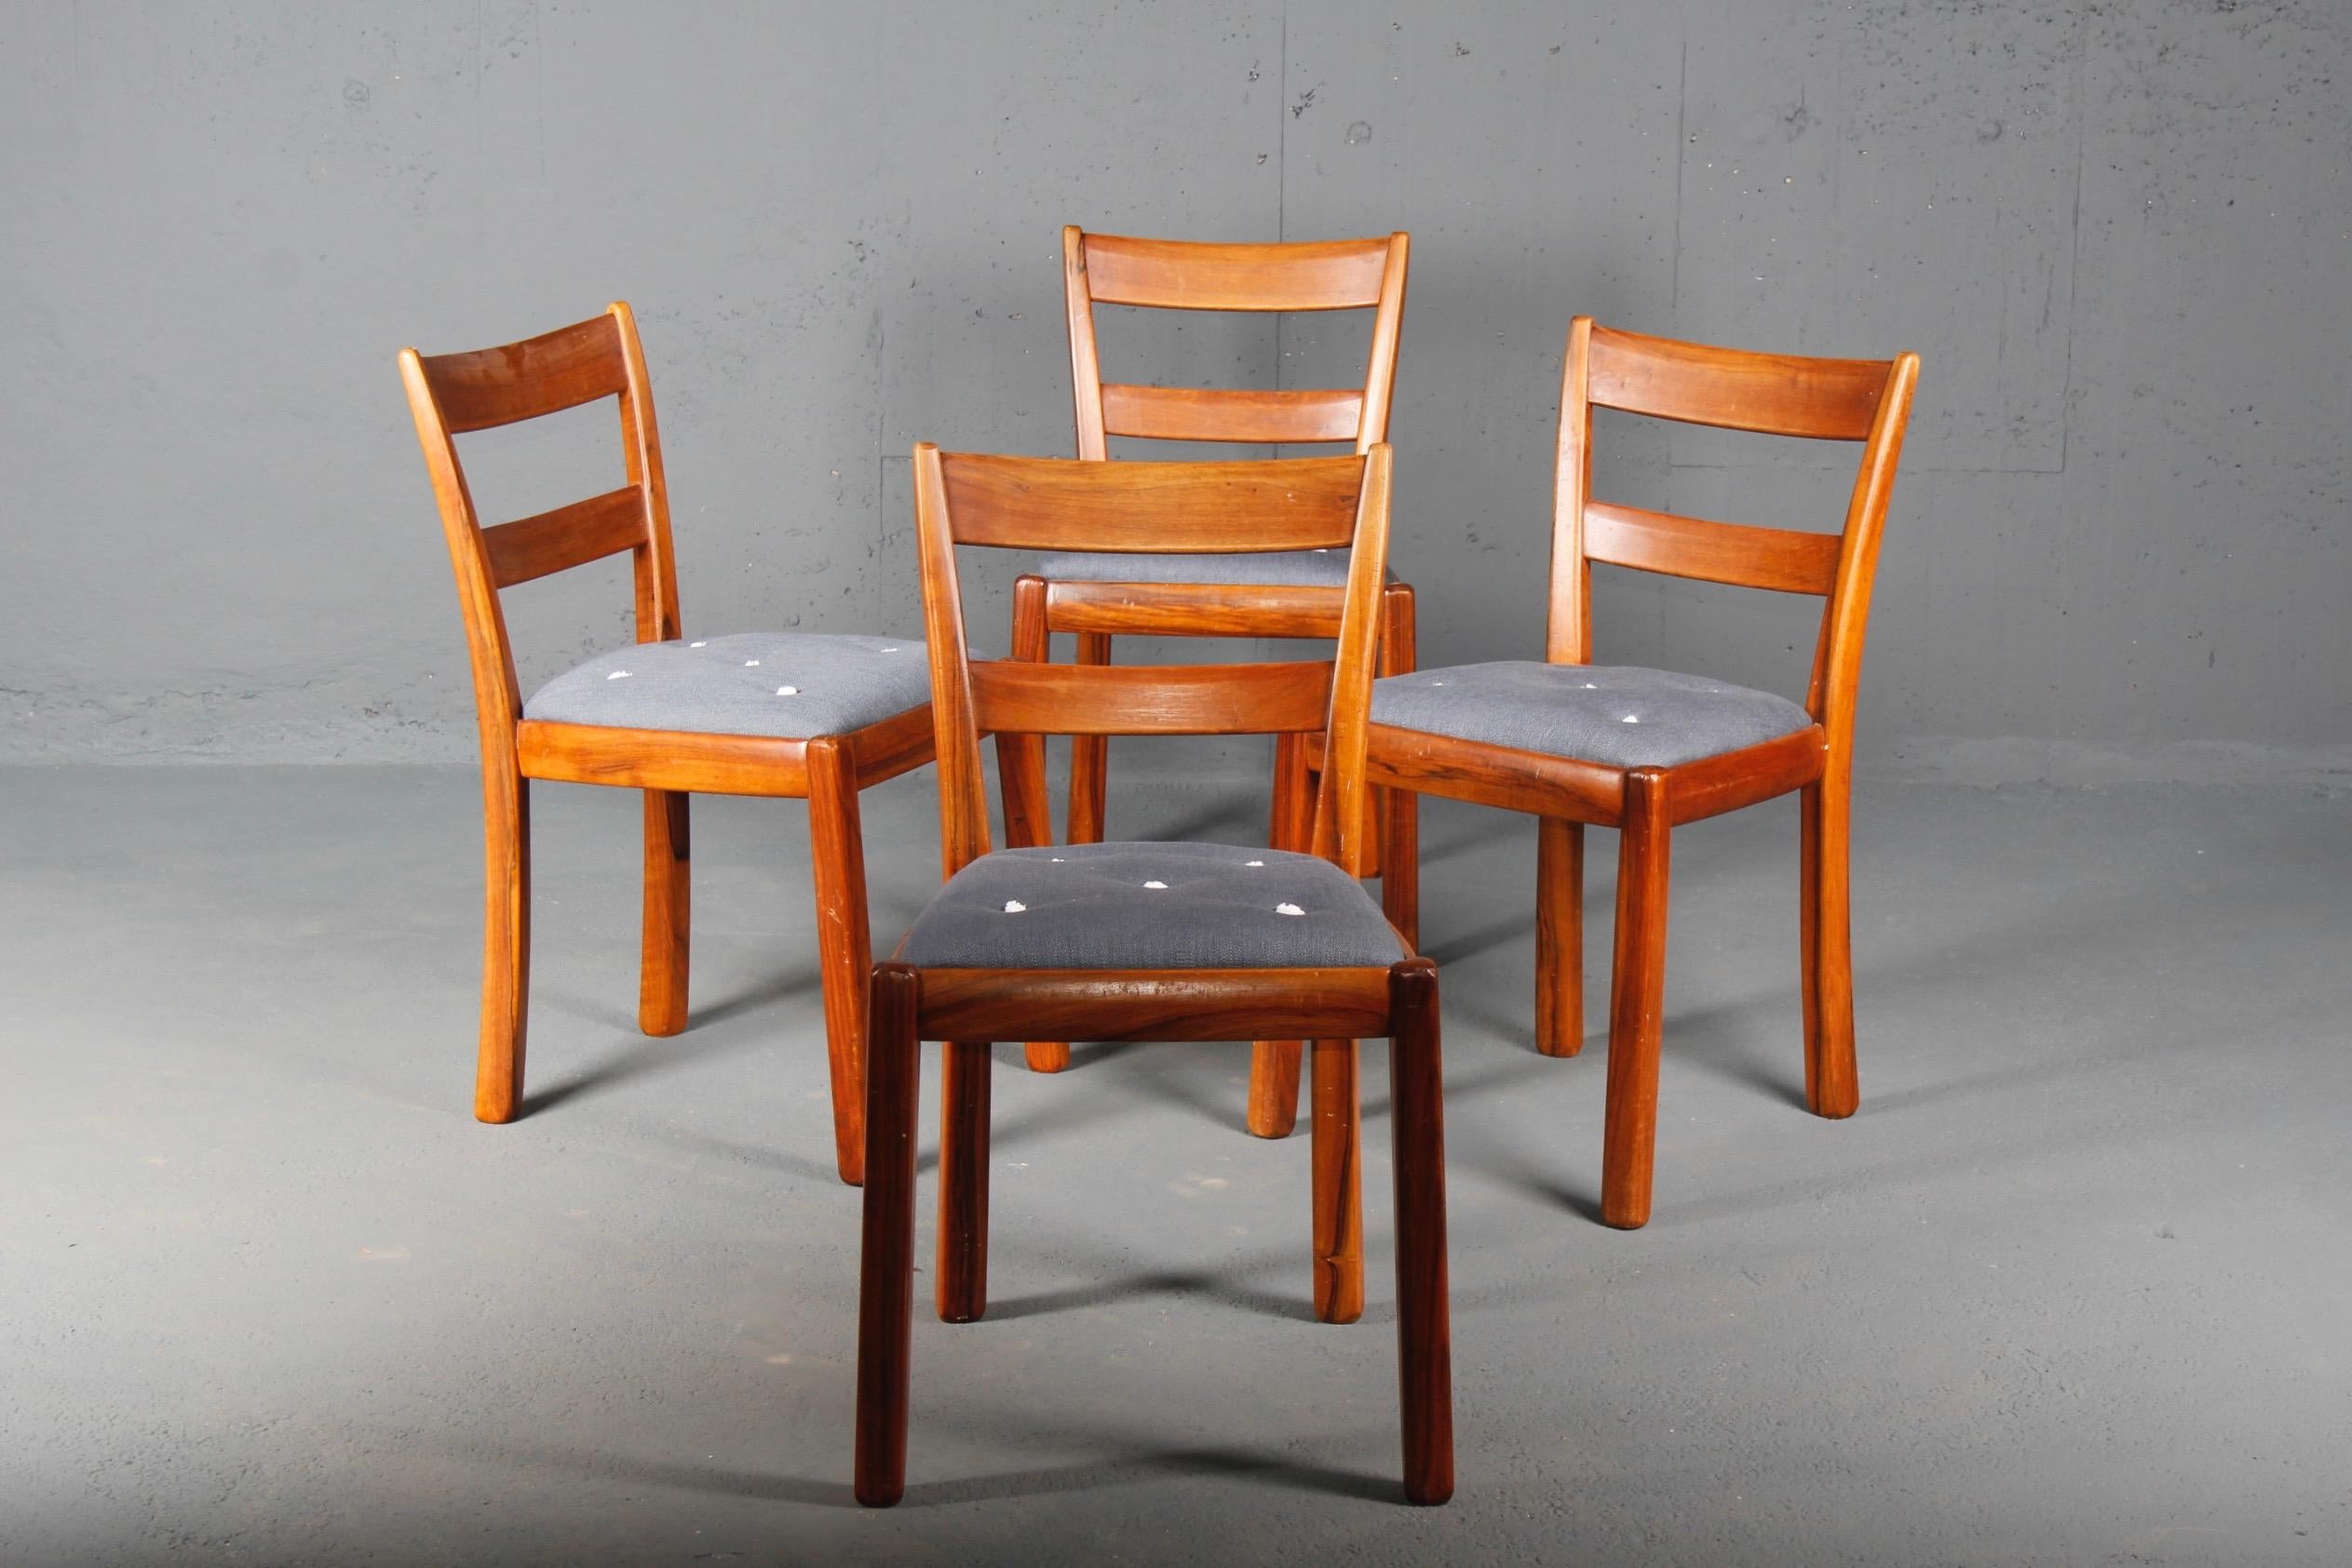 Set of 4 chairs.